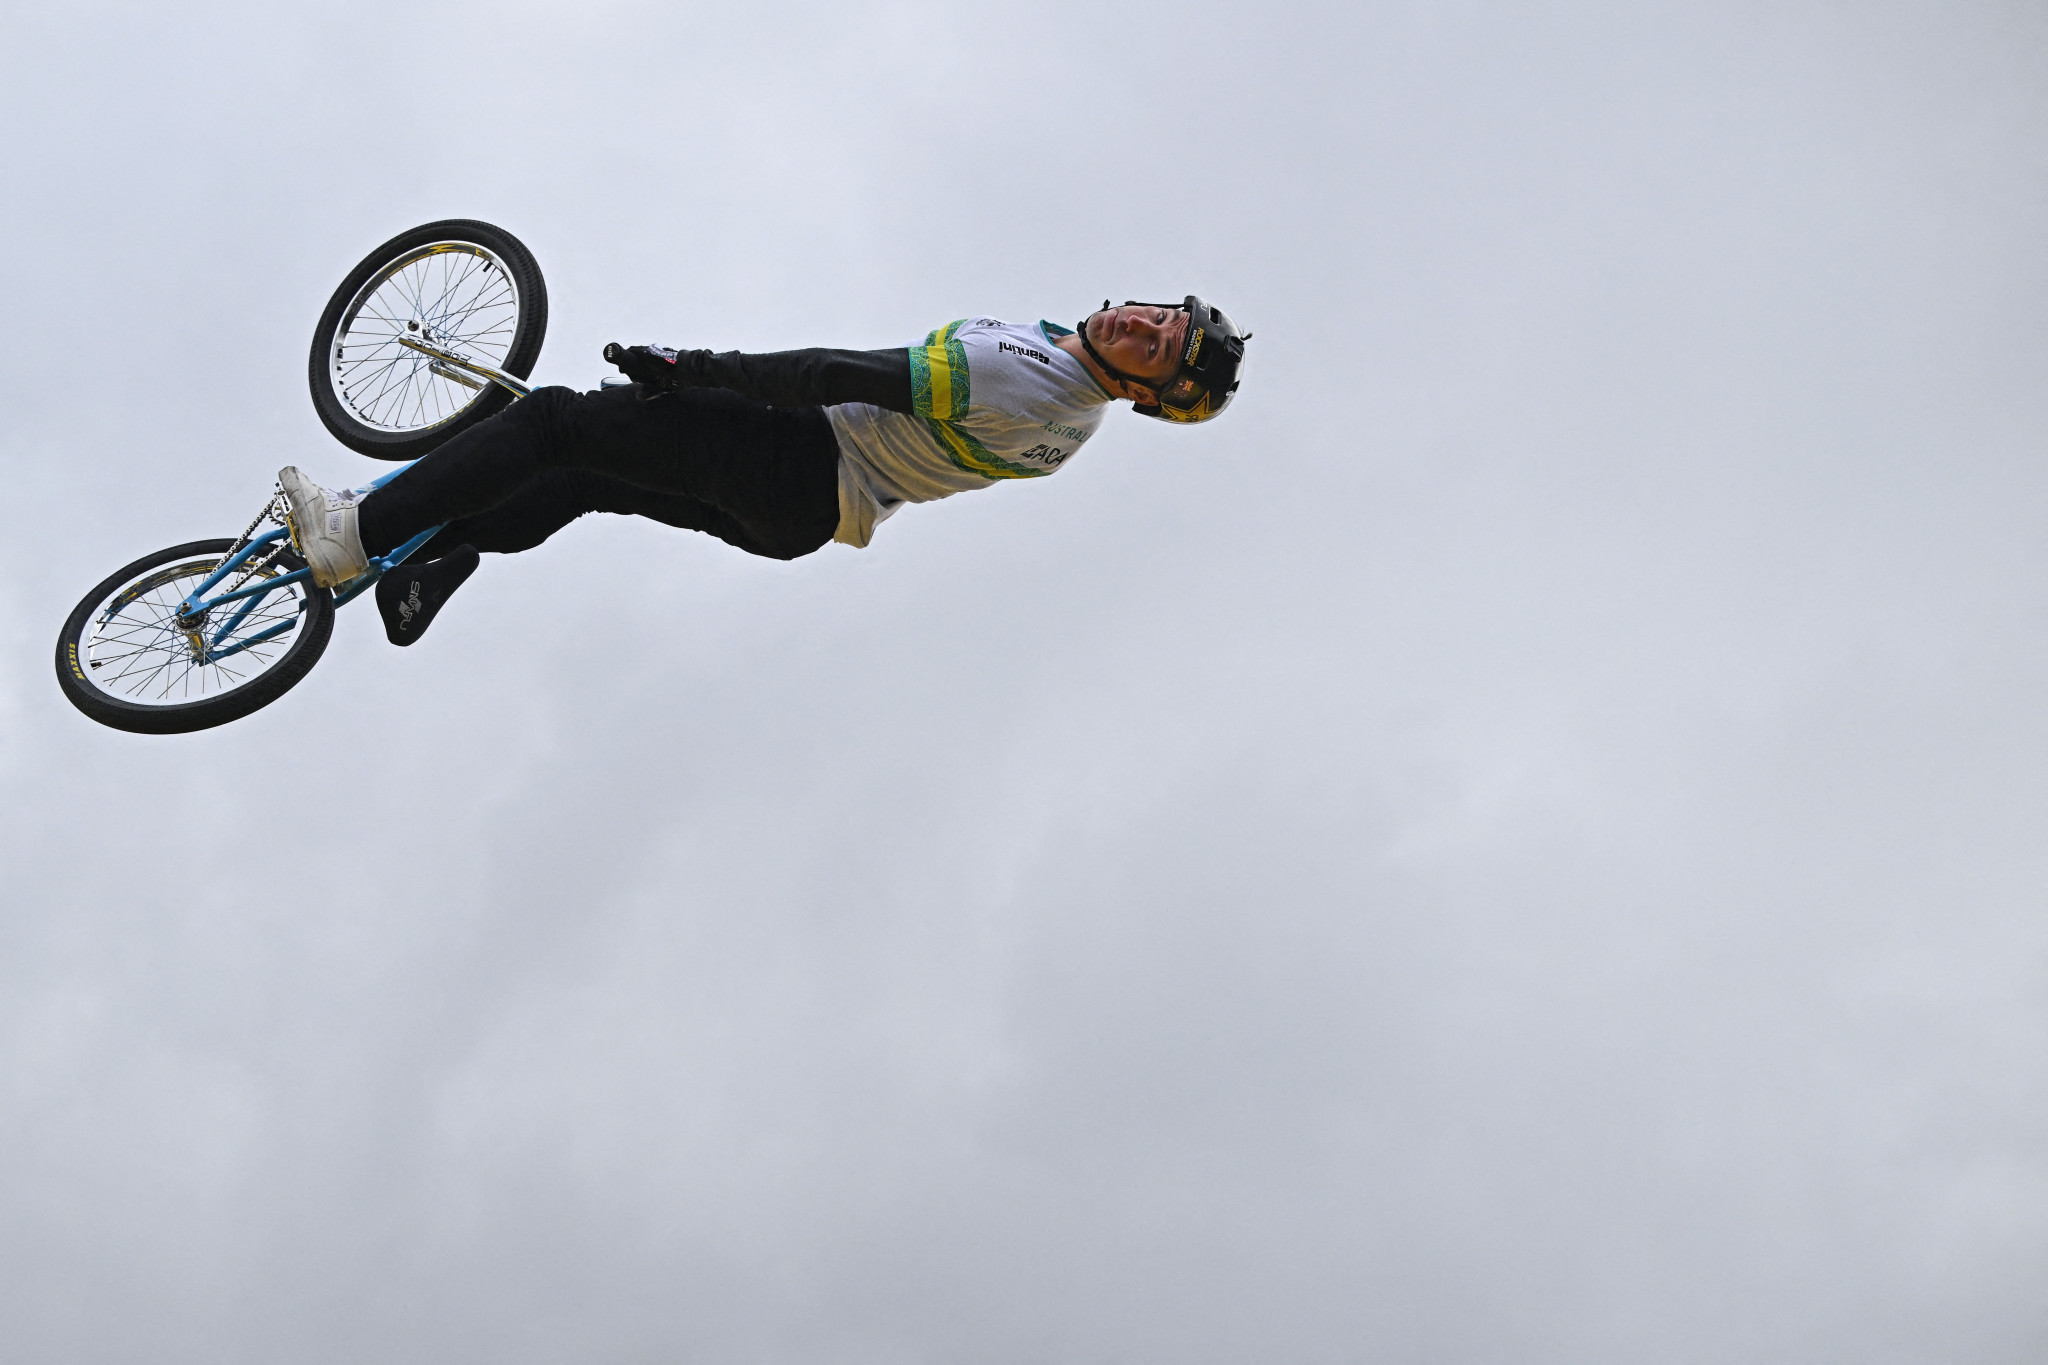 Martin and Roberts clinch overall UCI BMX Freestyle World Cup titles in China